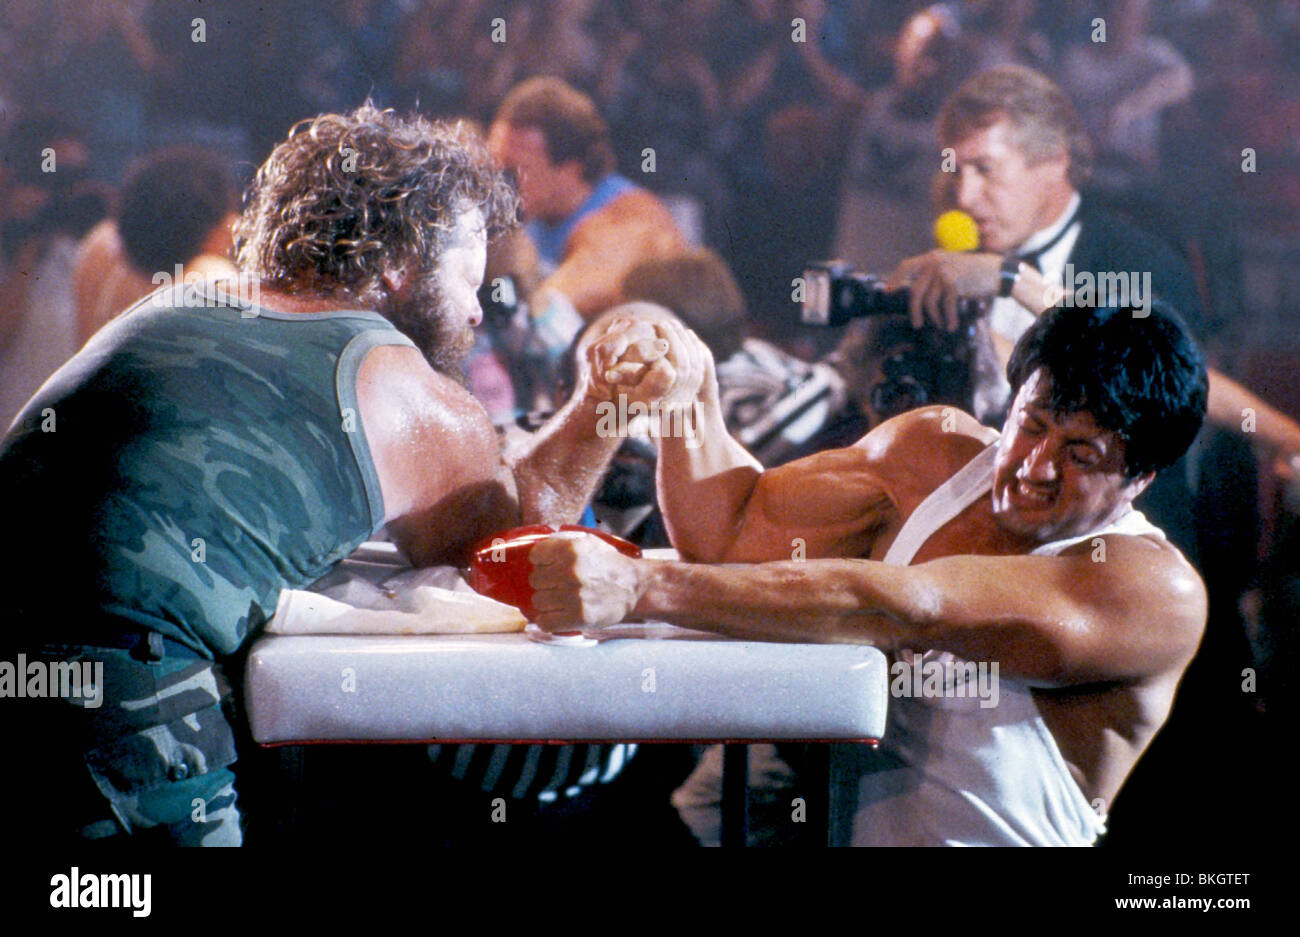 OVER THE TOP (1987) SYLVESTER STALLONE OVTP 004 Stock Photo - Alamy